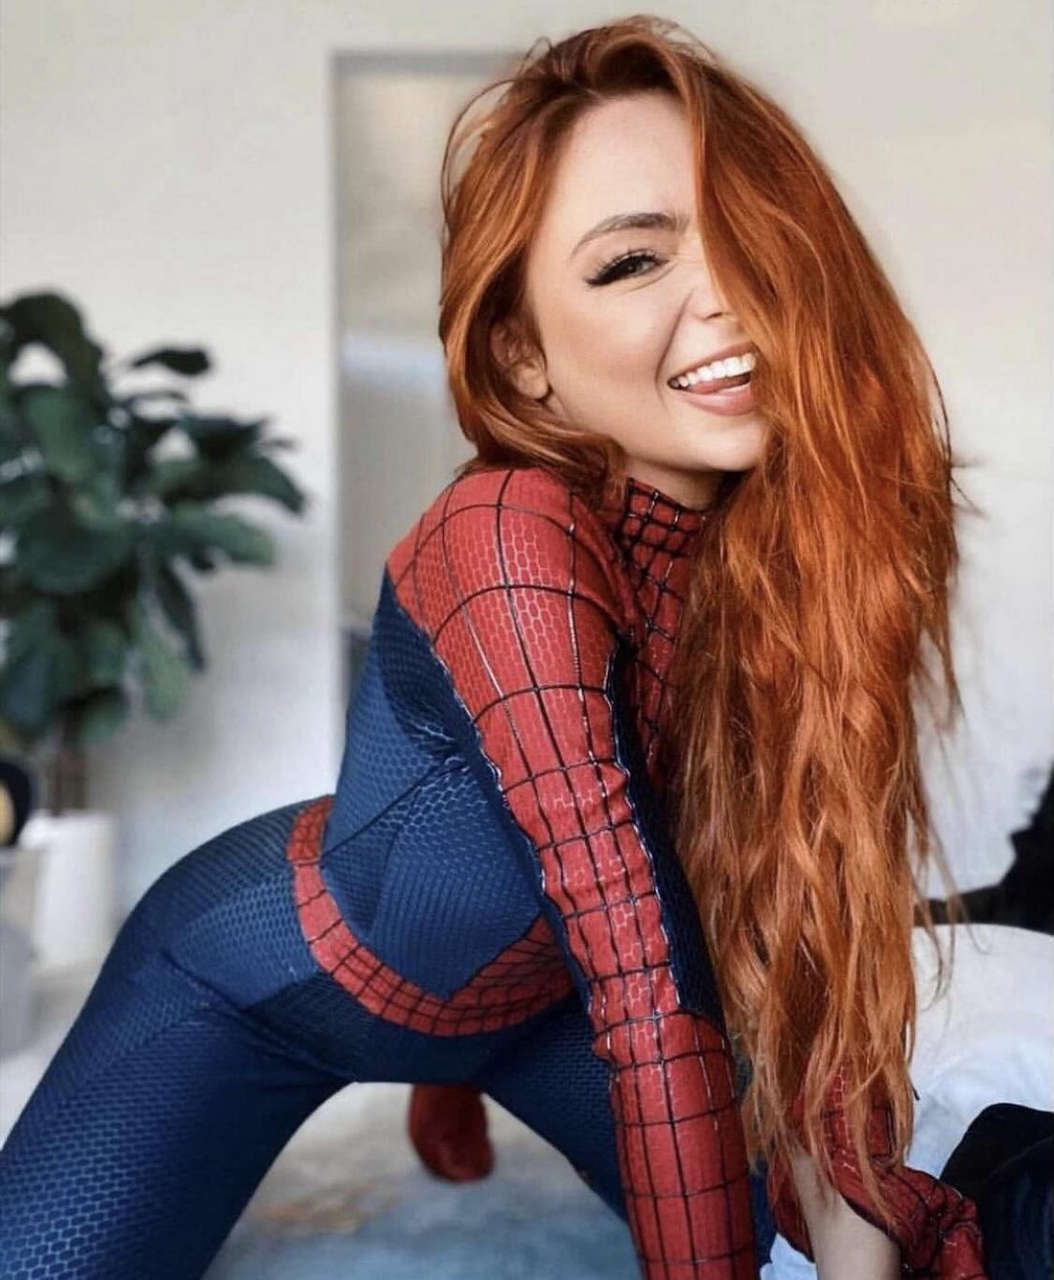 Mary Jane By Caitlin Christine Click Link I